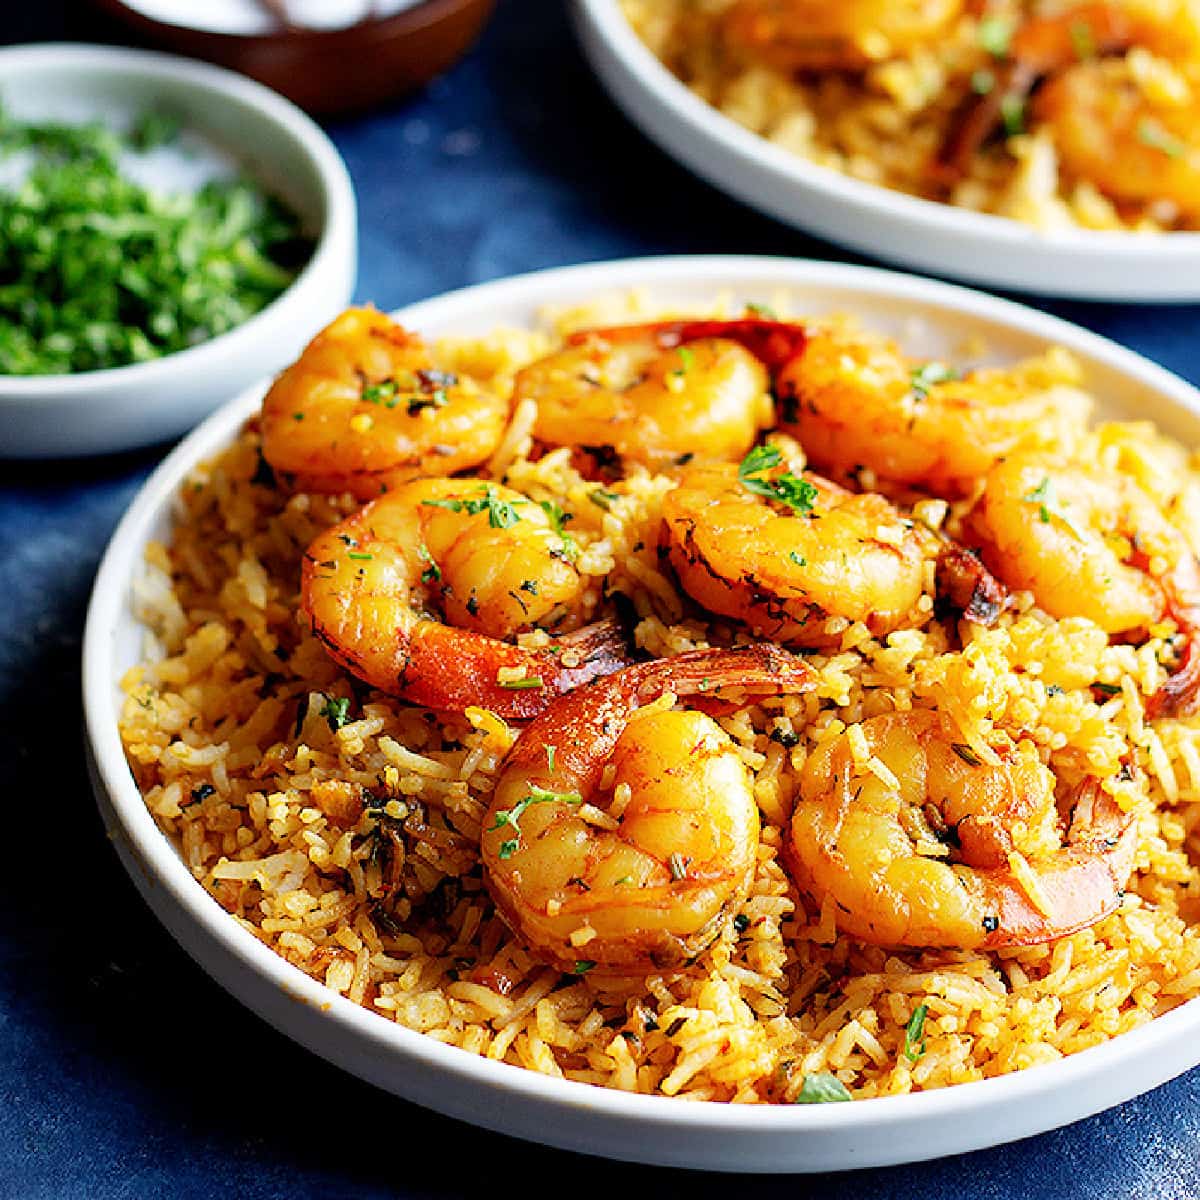 Try the classic combination of shrimp and rice with a Persian twist. This dish is packed with delicious and warm Middle Eastern spices! Master this recipe by watching our video and step-by-step tutorial.
